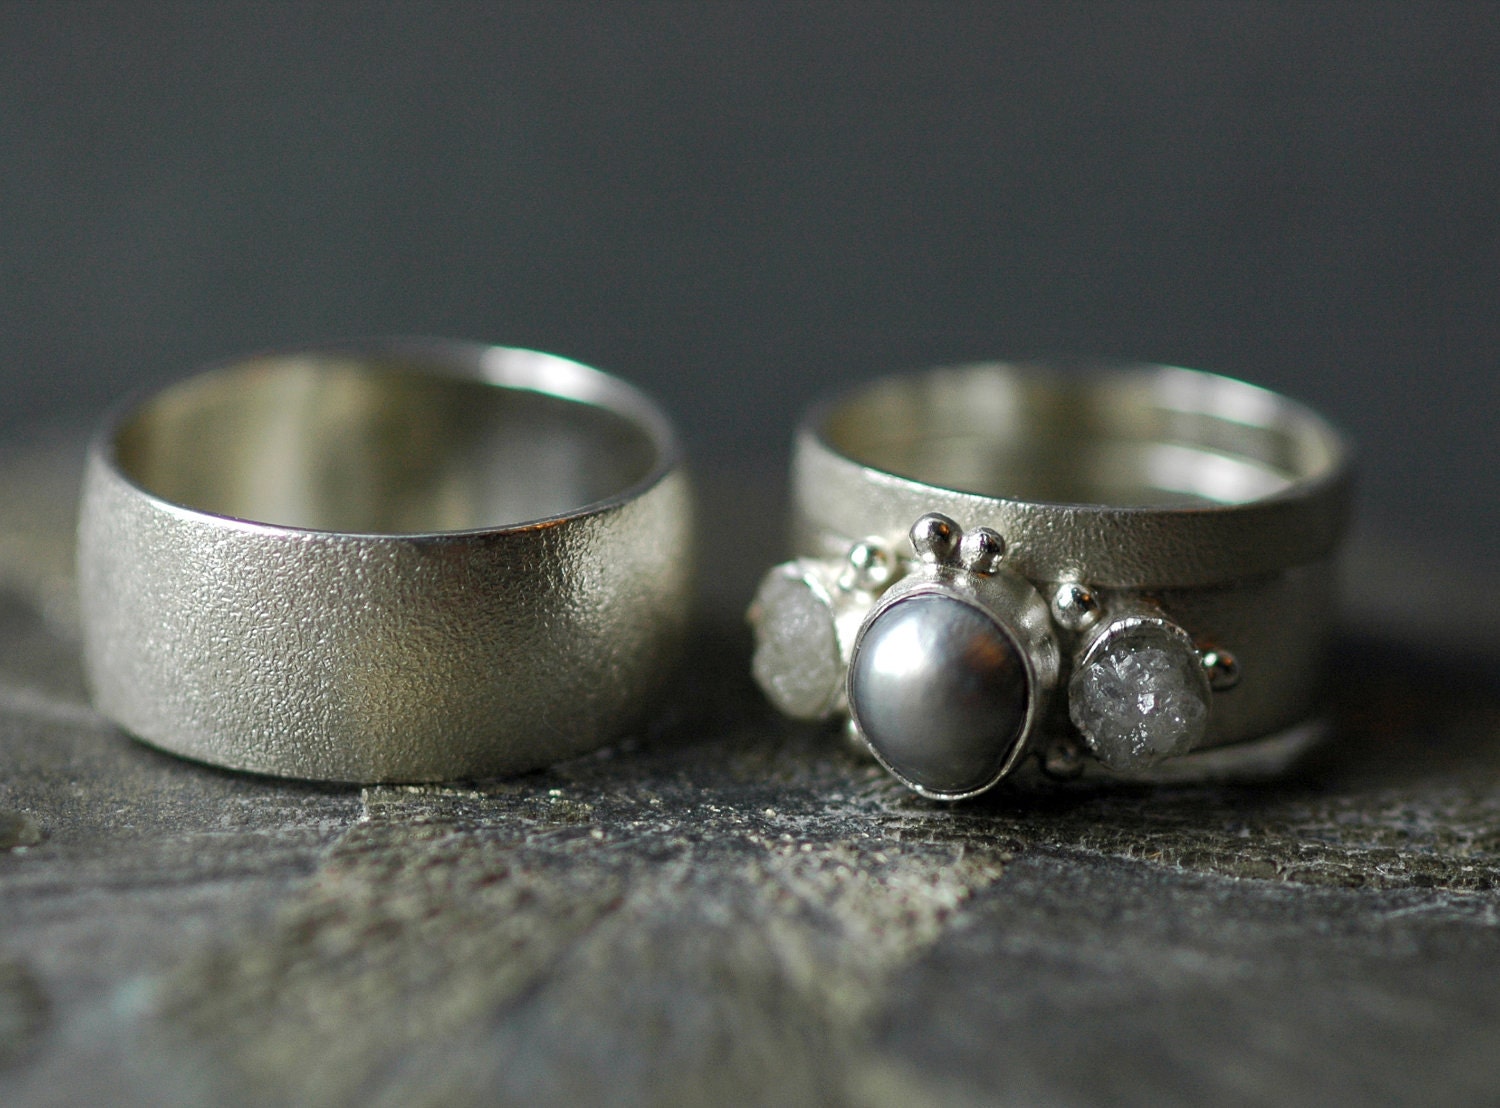 Three Rings Rough Diamond and Pearl Engagement Ring and Hisandhers 